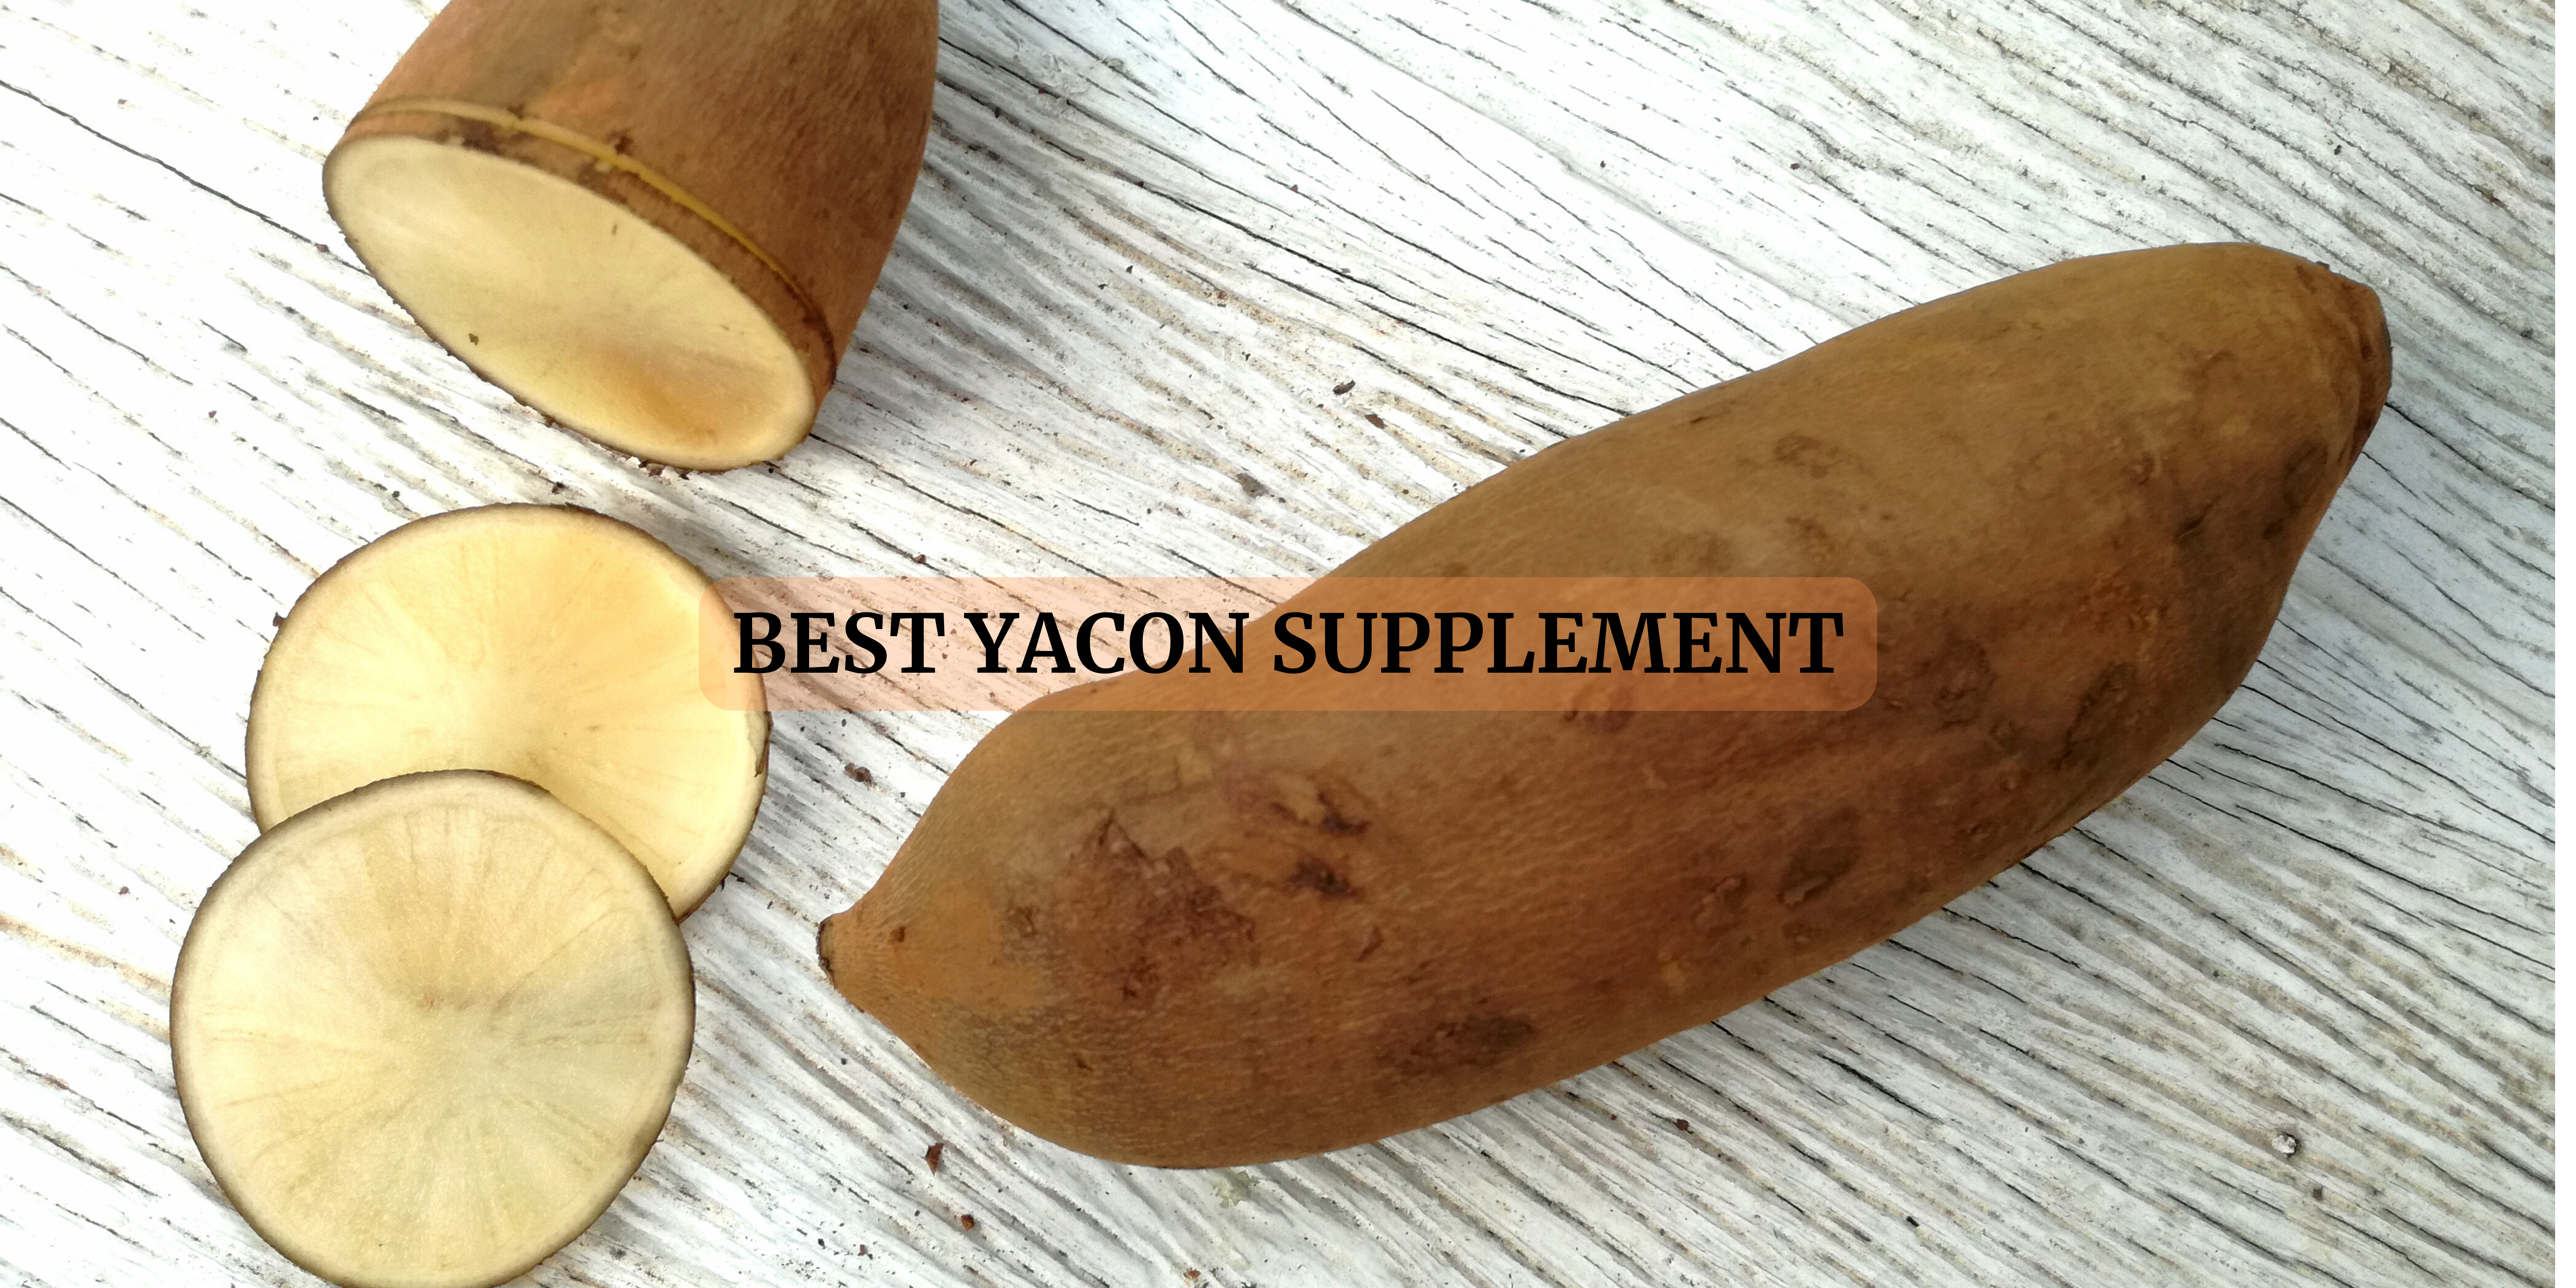 Yacon Supplements in Spain